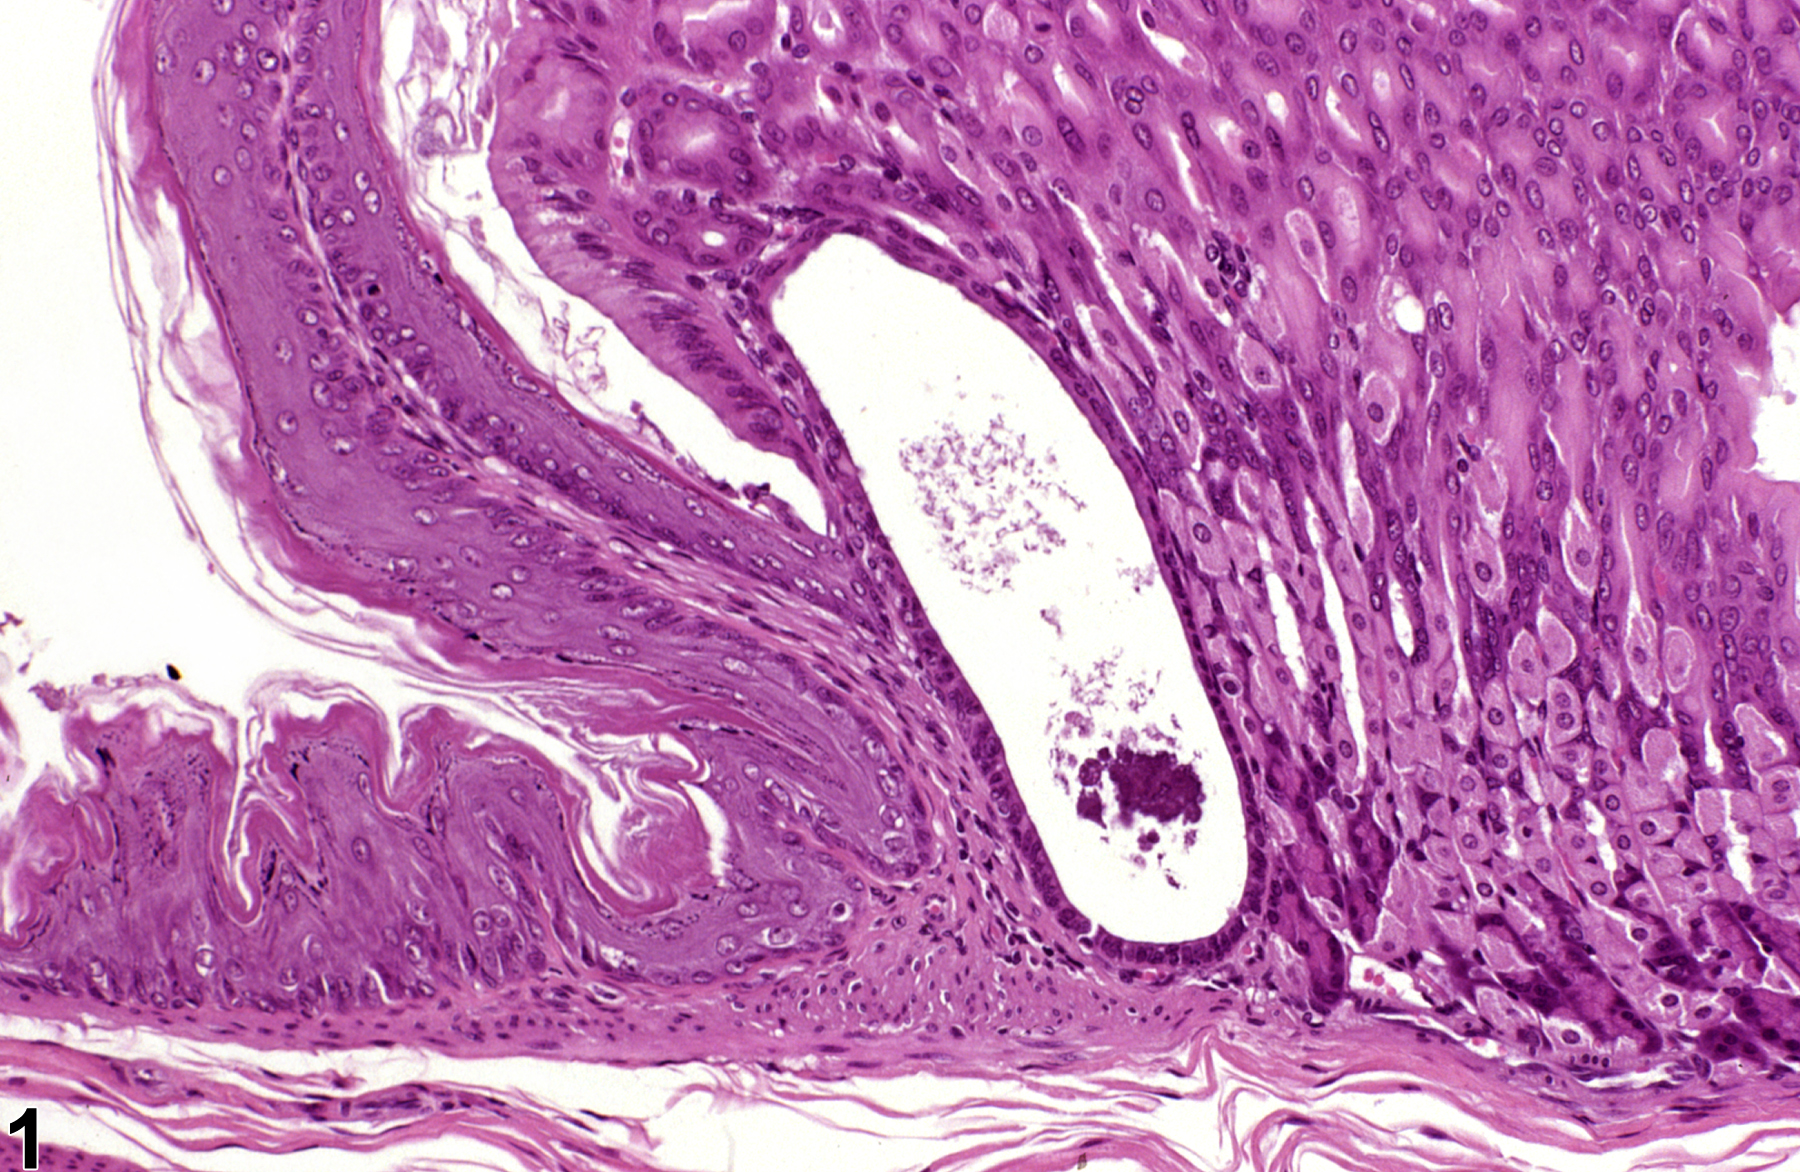 Image of cyst in the glandular stomach glands from a male B6C3F1 mouse in a subchronic study